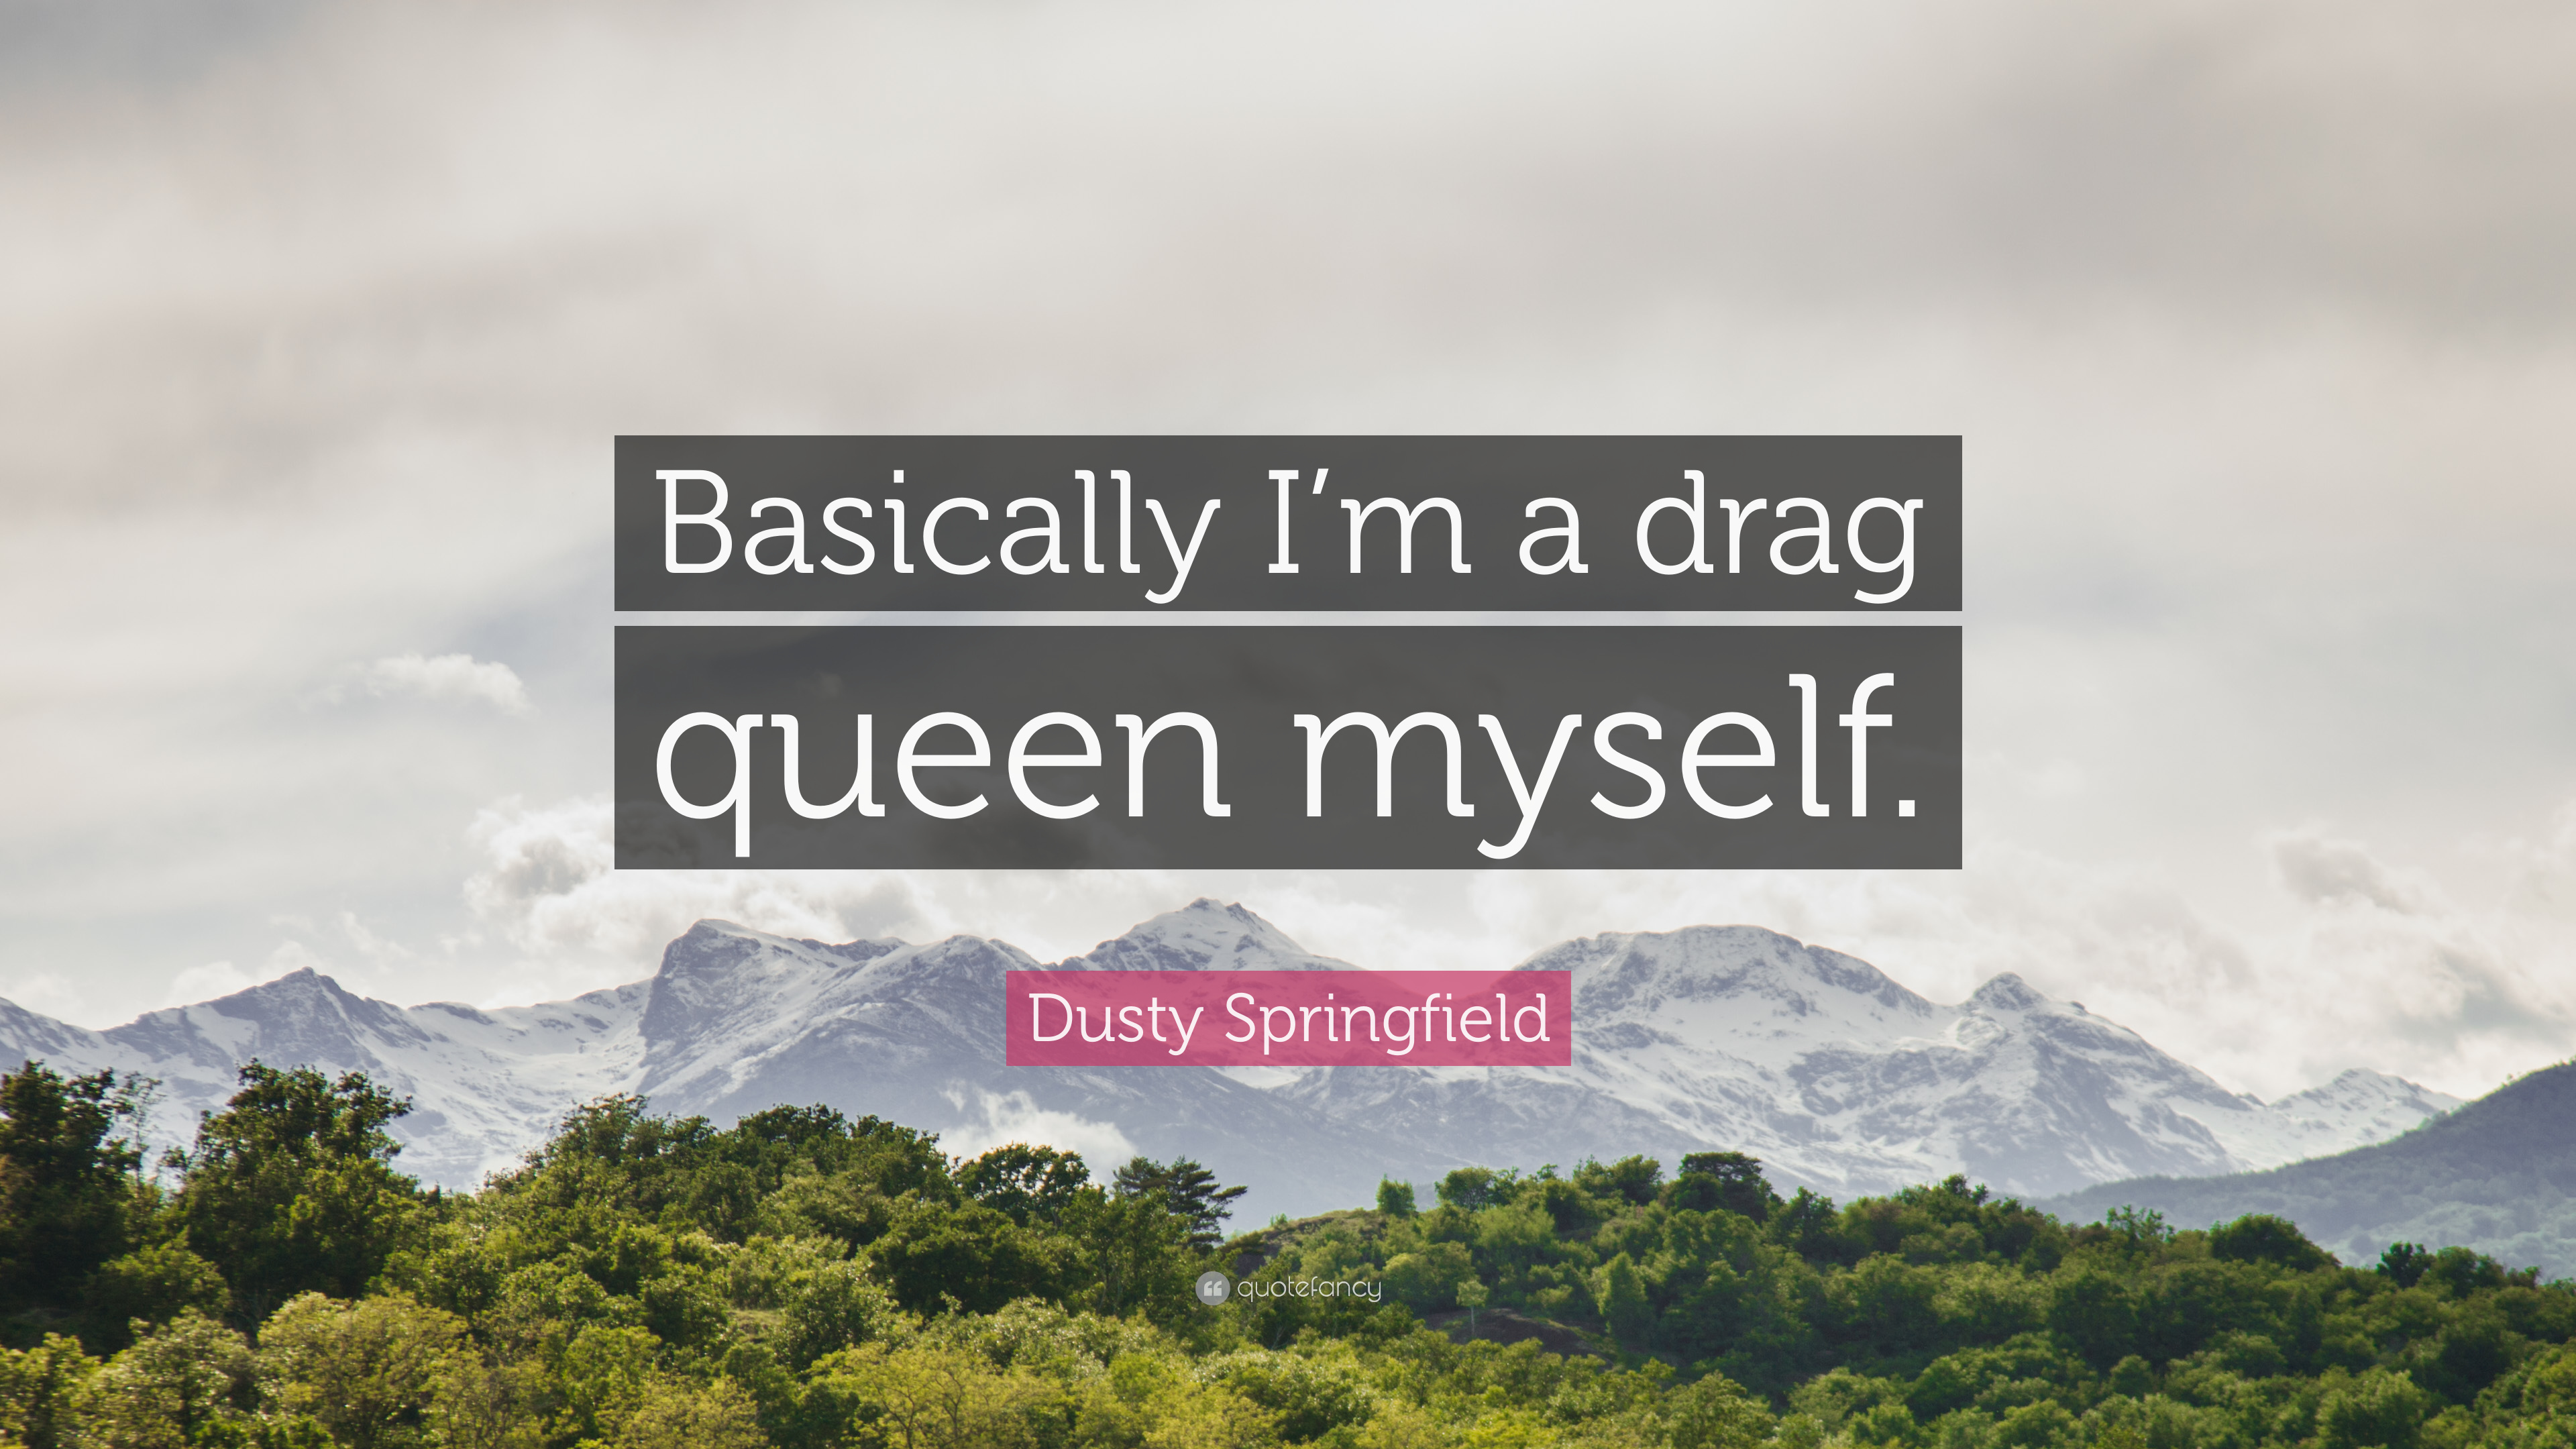 Dusty Springfield Quote: “Basically I'm a drag queen myself.” 7